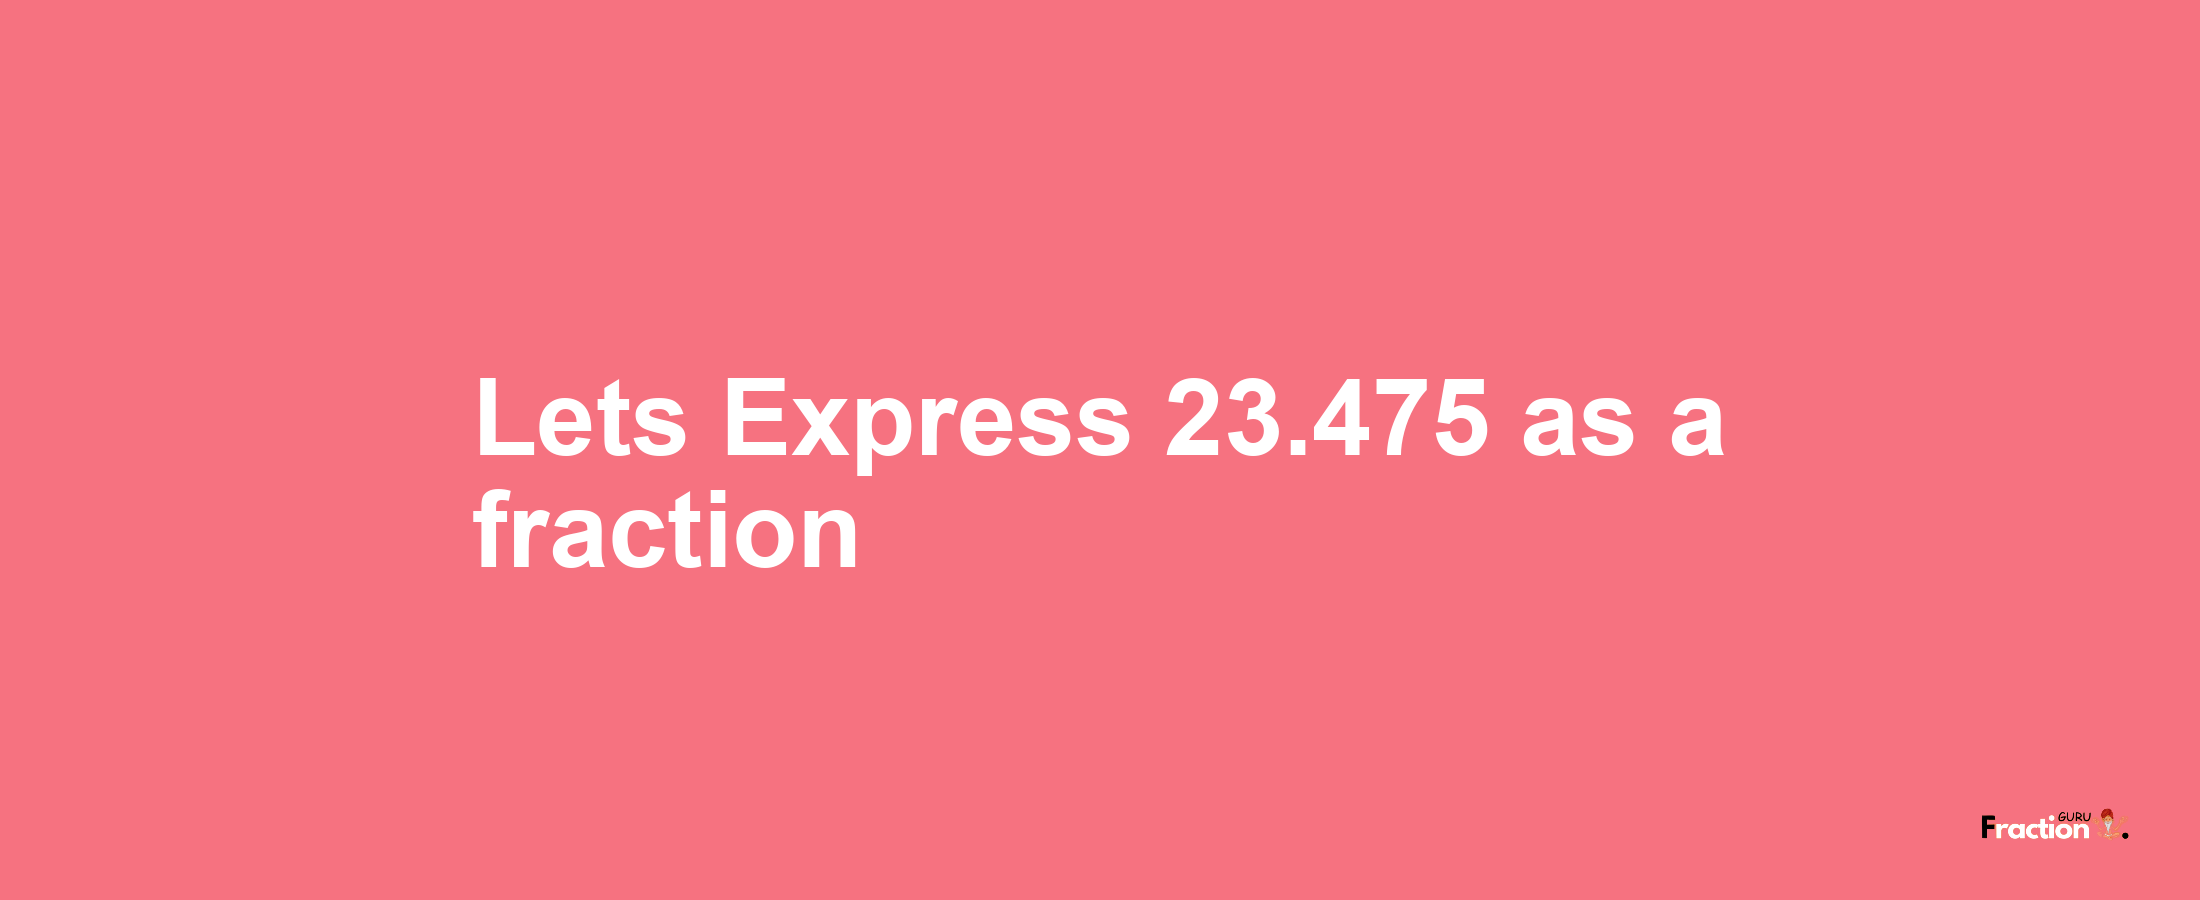 Lets Express 23.475 as afraction